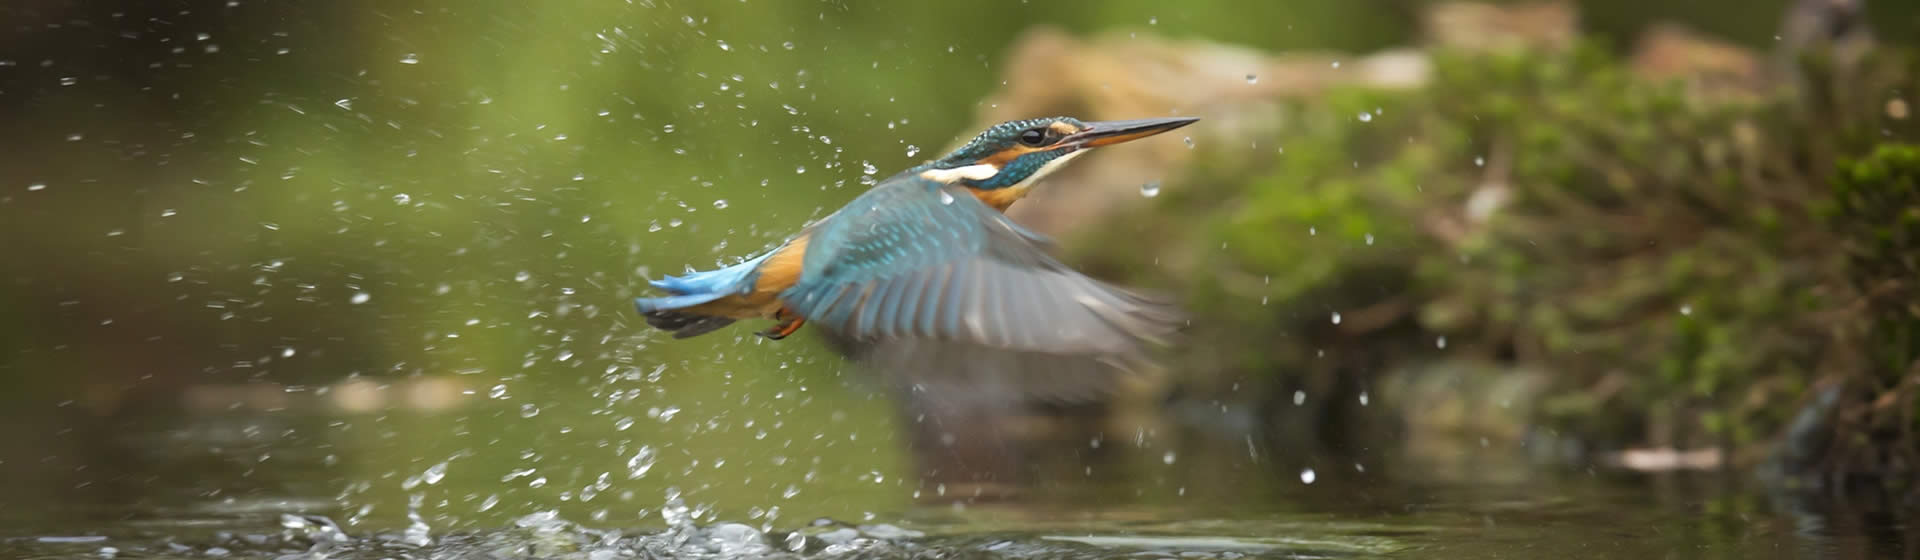 kingfisher in natural environment